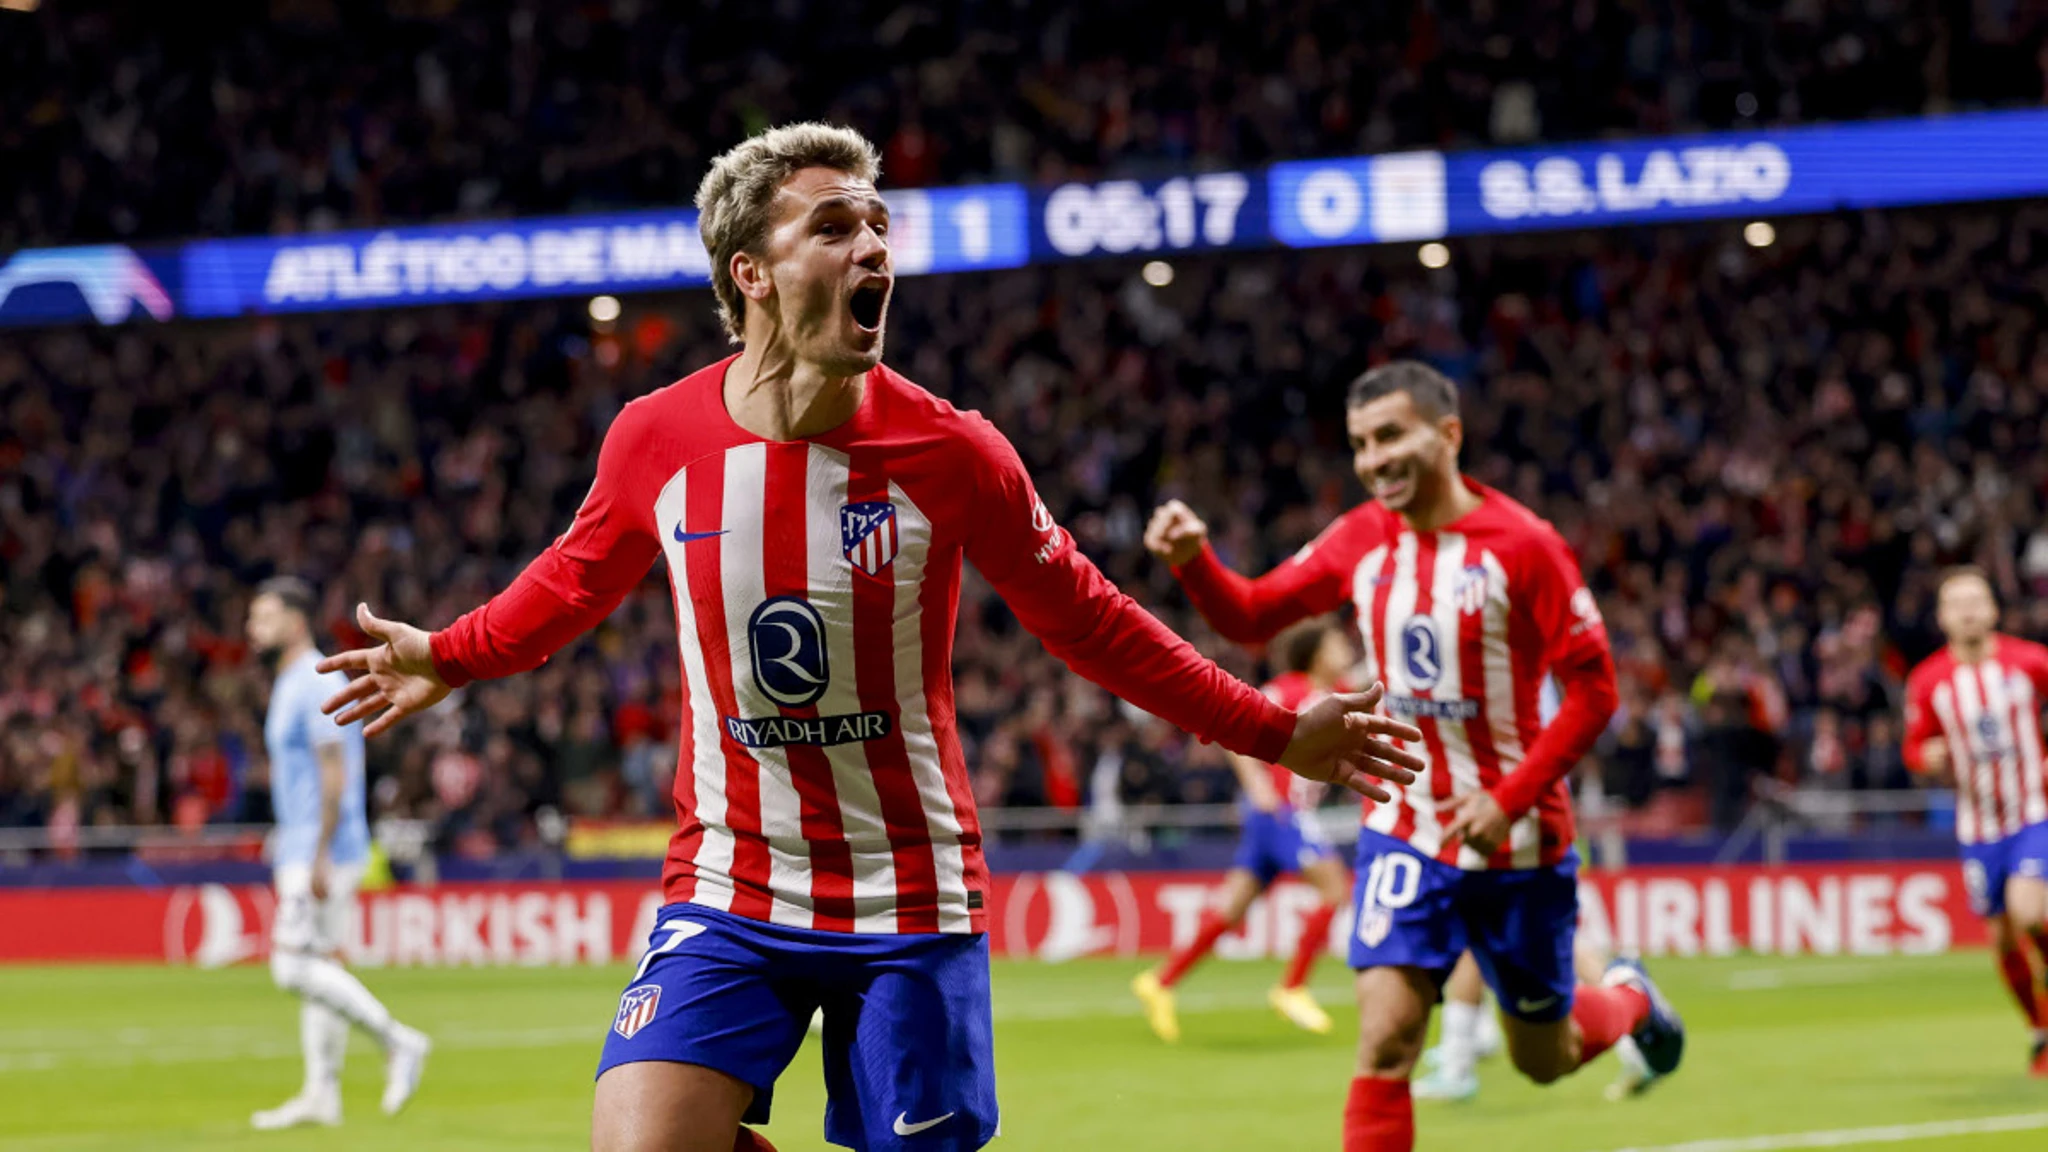 Atletico Madrid win group after win over Lazio | SuperSport